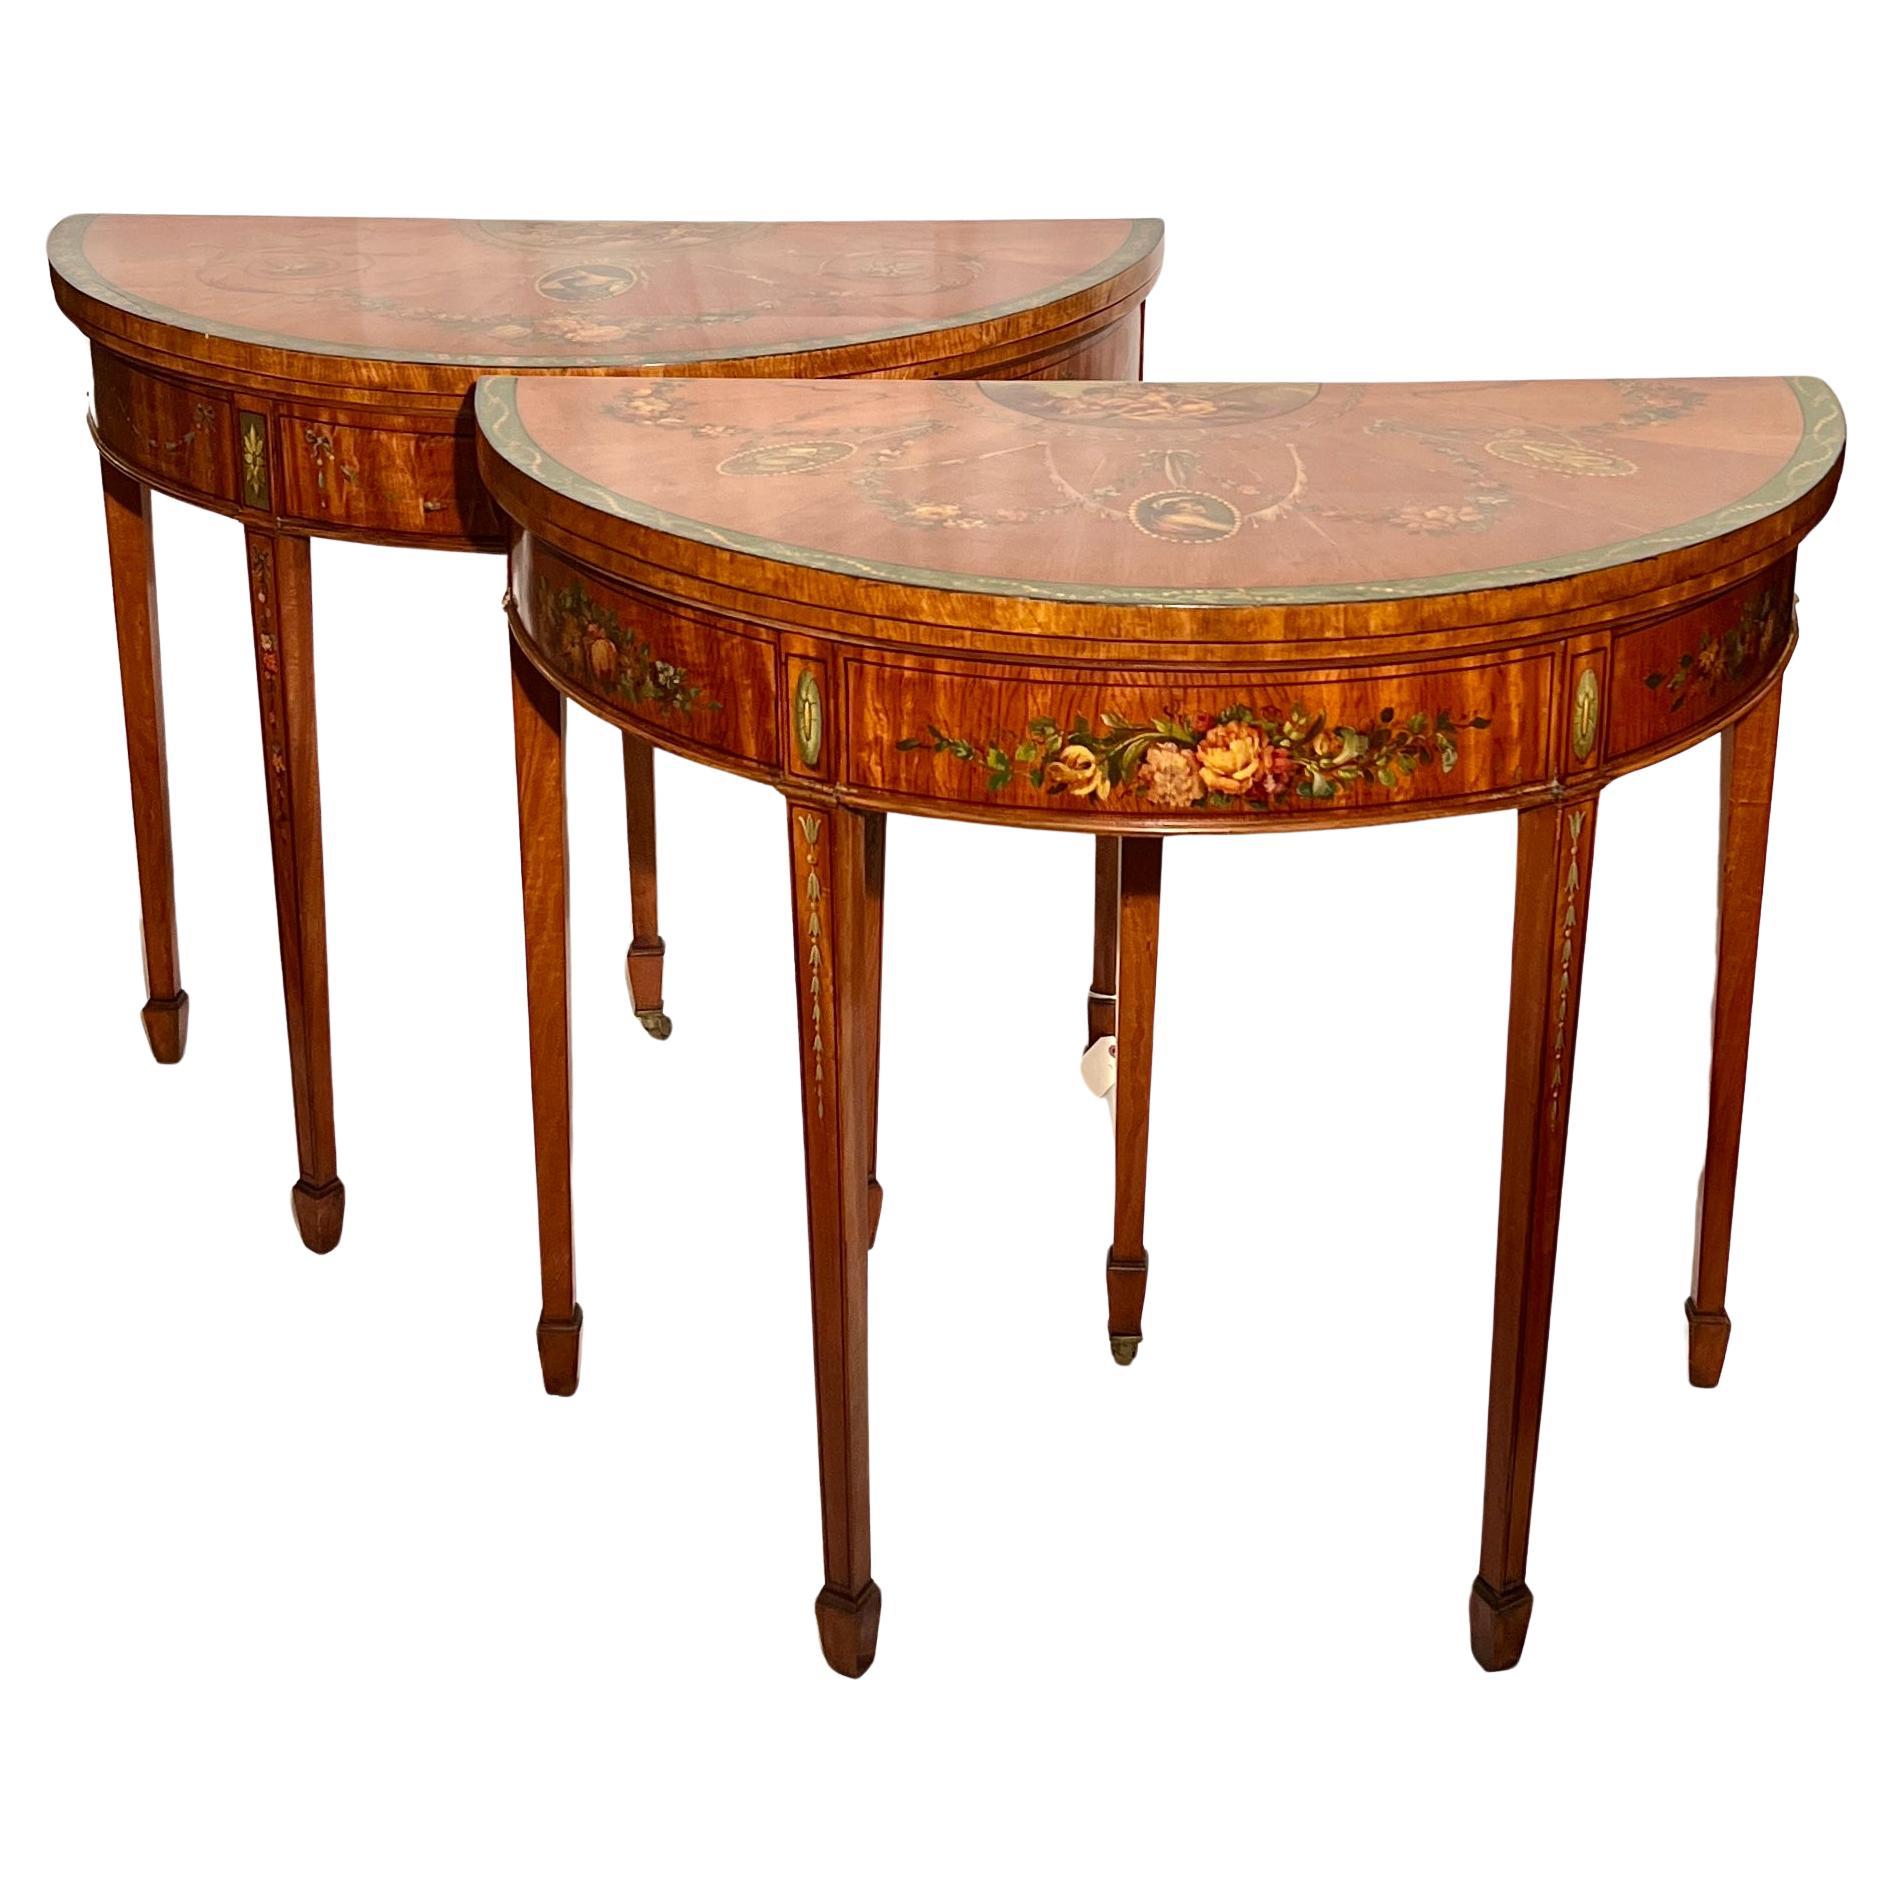 Pair Antique English Painted Satinwood Demi-Lune Console Tables, Circa 1890.